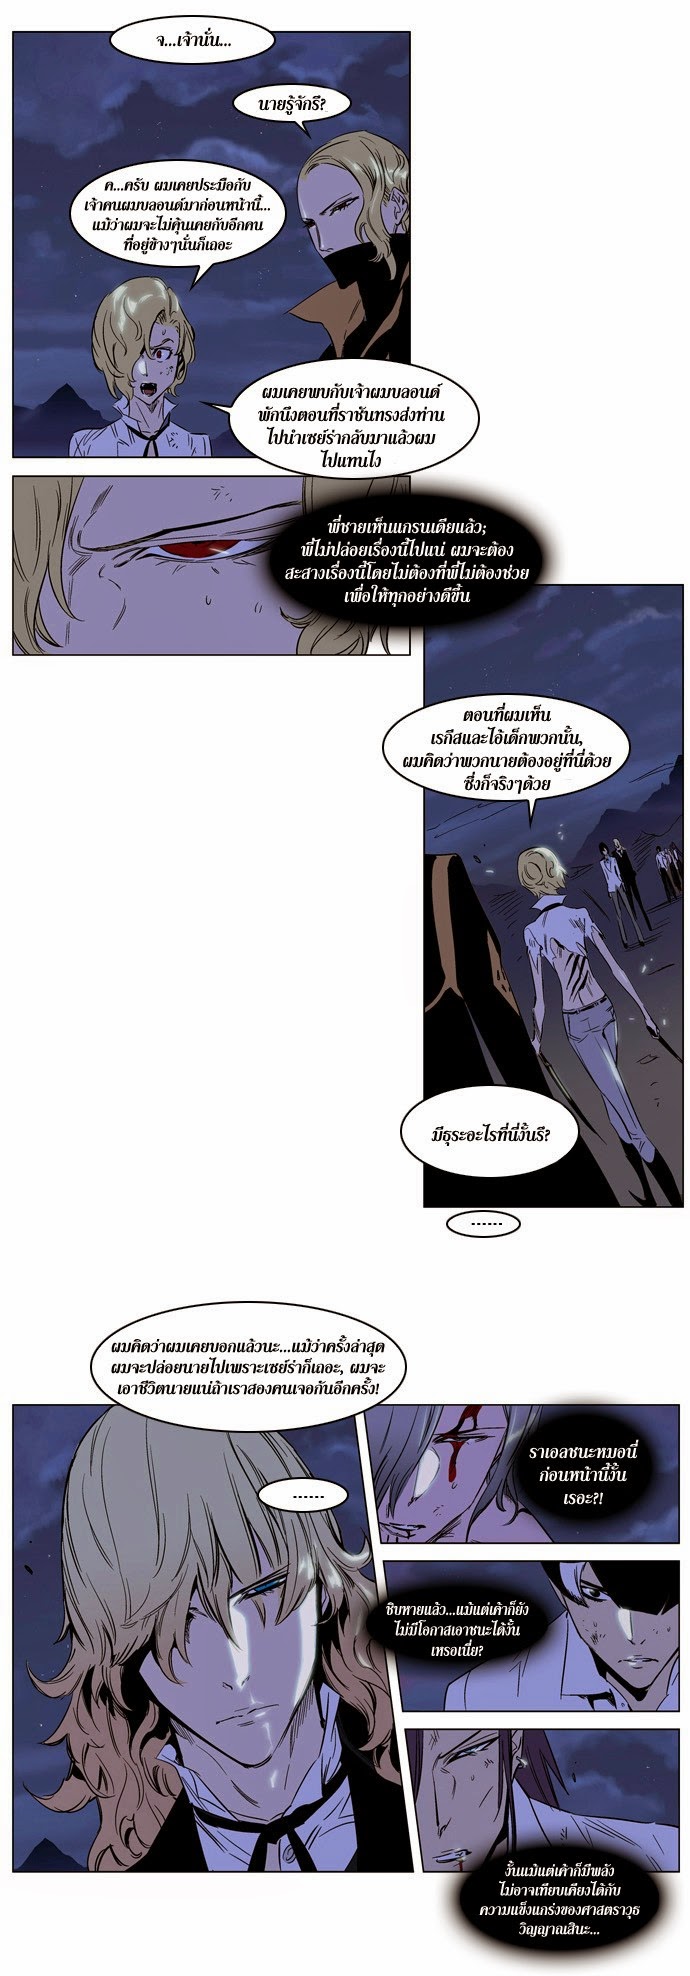 Noblesse 188 011